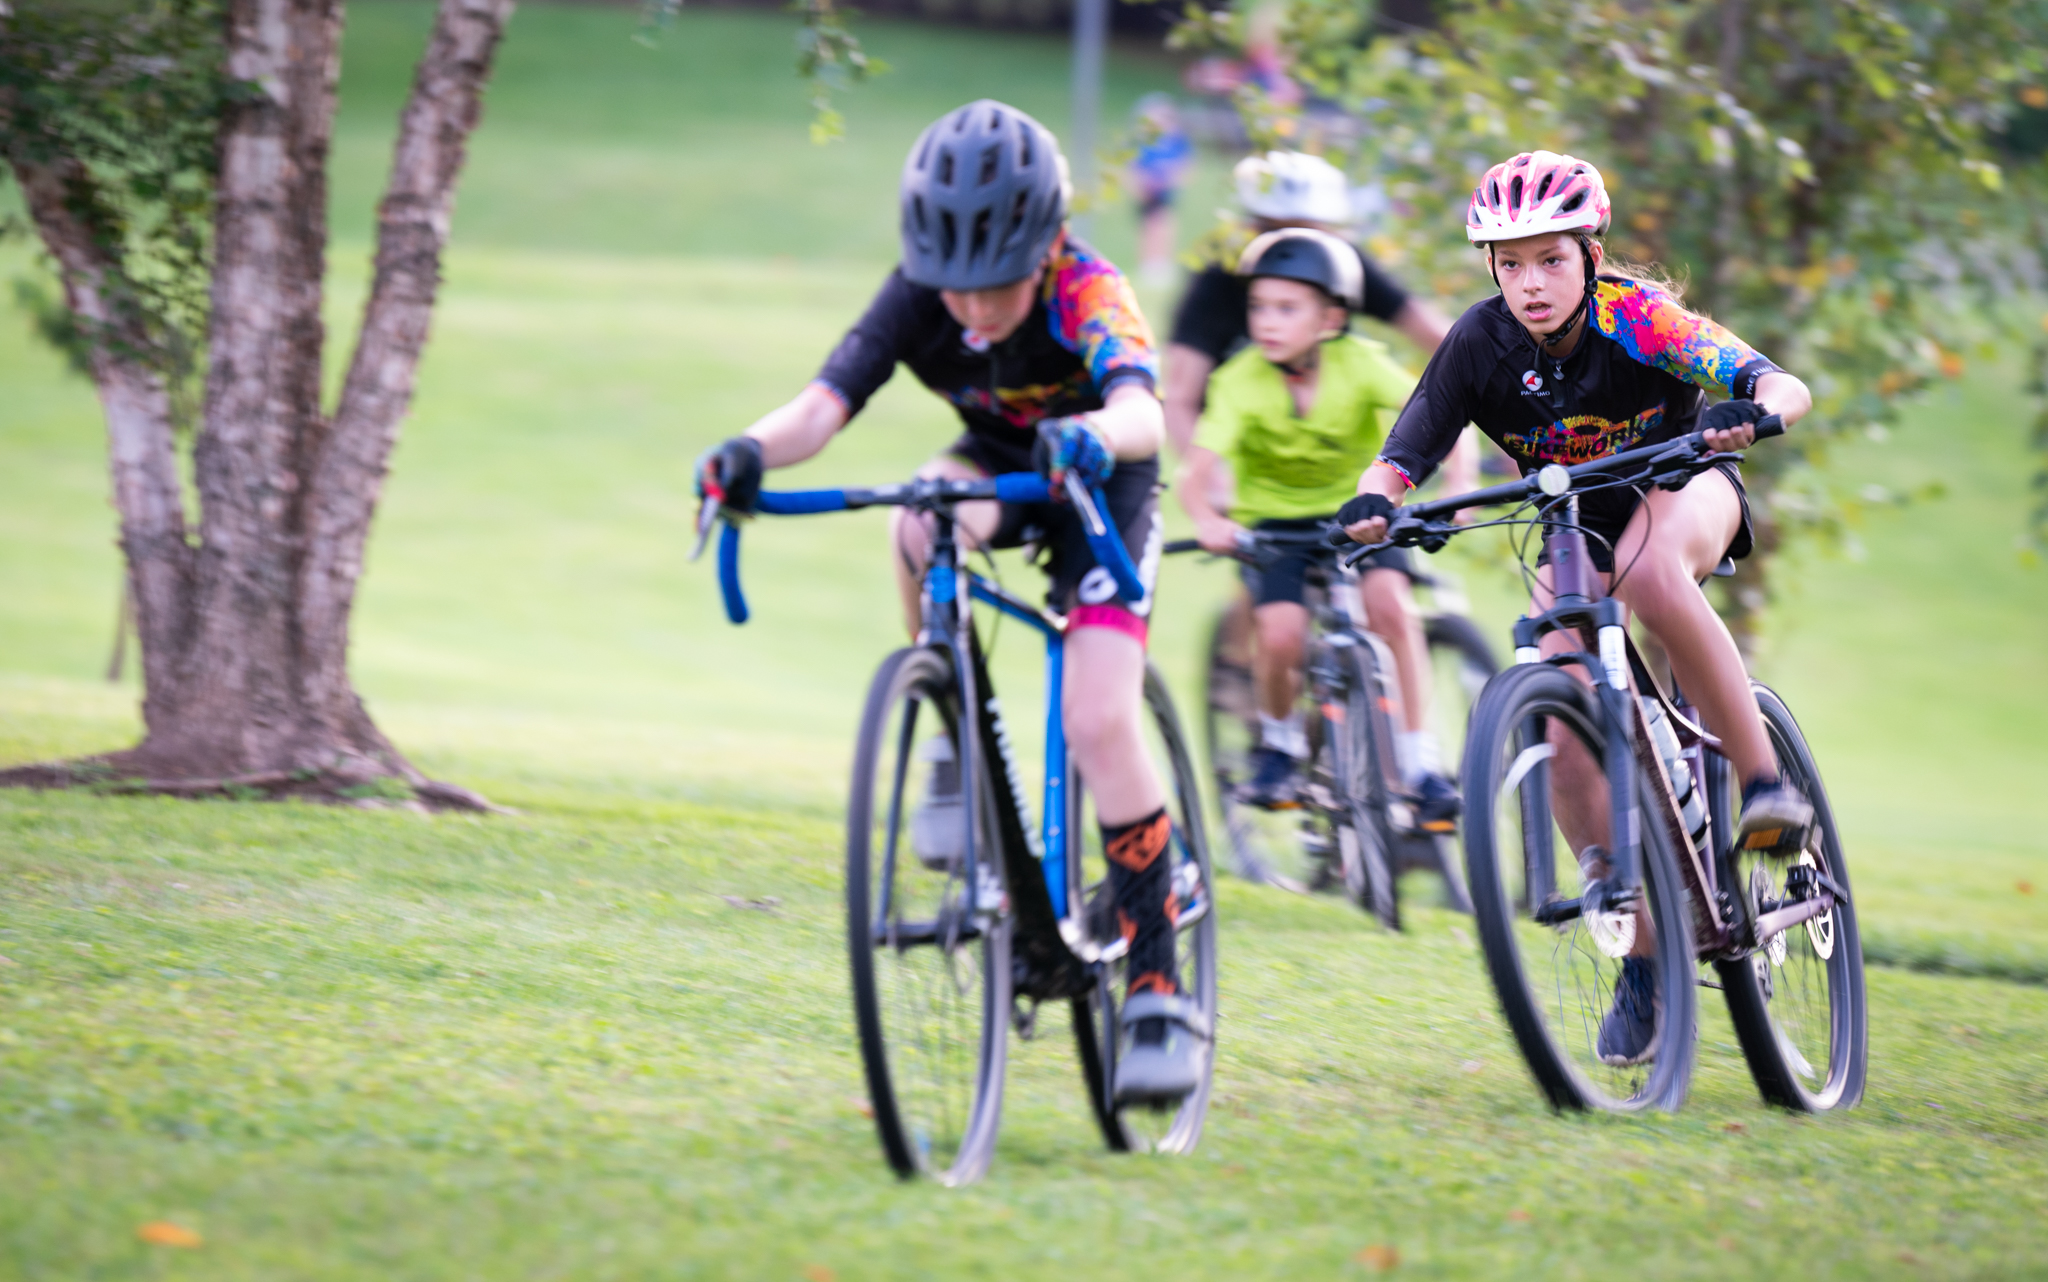 Juniors Cyclocross and Learn-to-ride clinics are free to all kids no matter their skill level. Click here to find out more! Our Bikeworks Juniors racers compete throughout the season in various biking events in the Northeast.